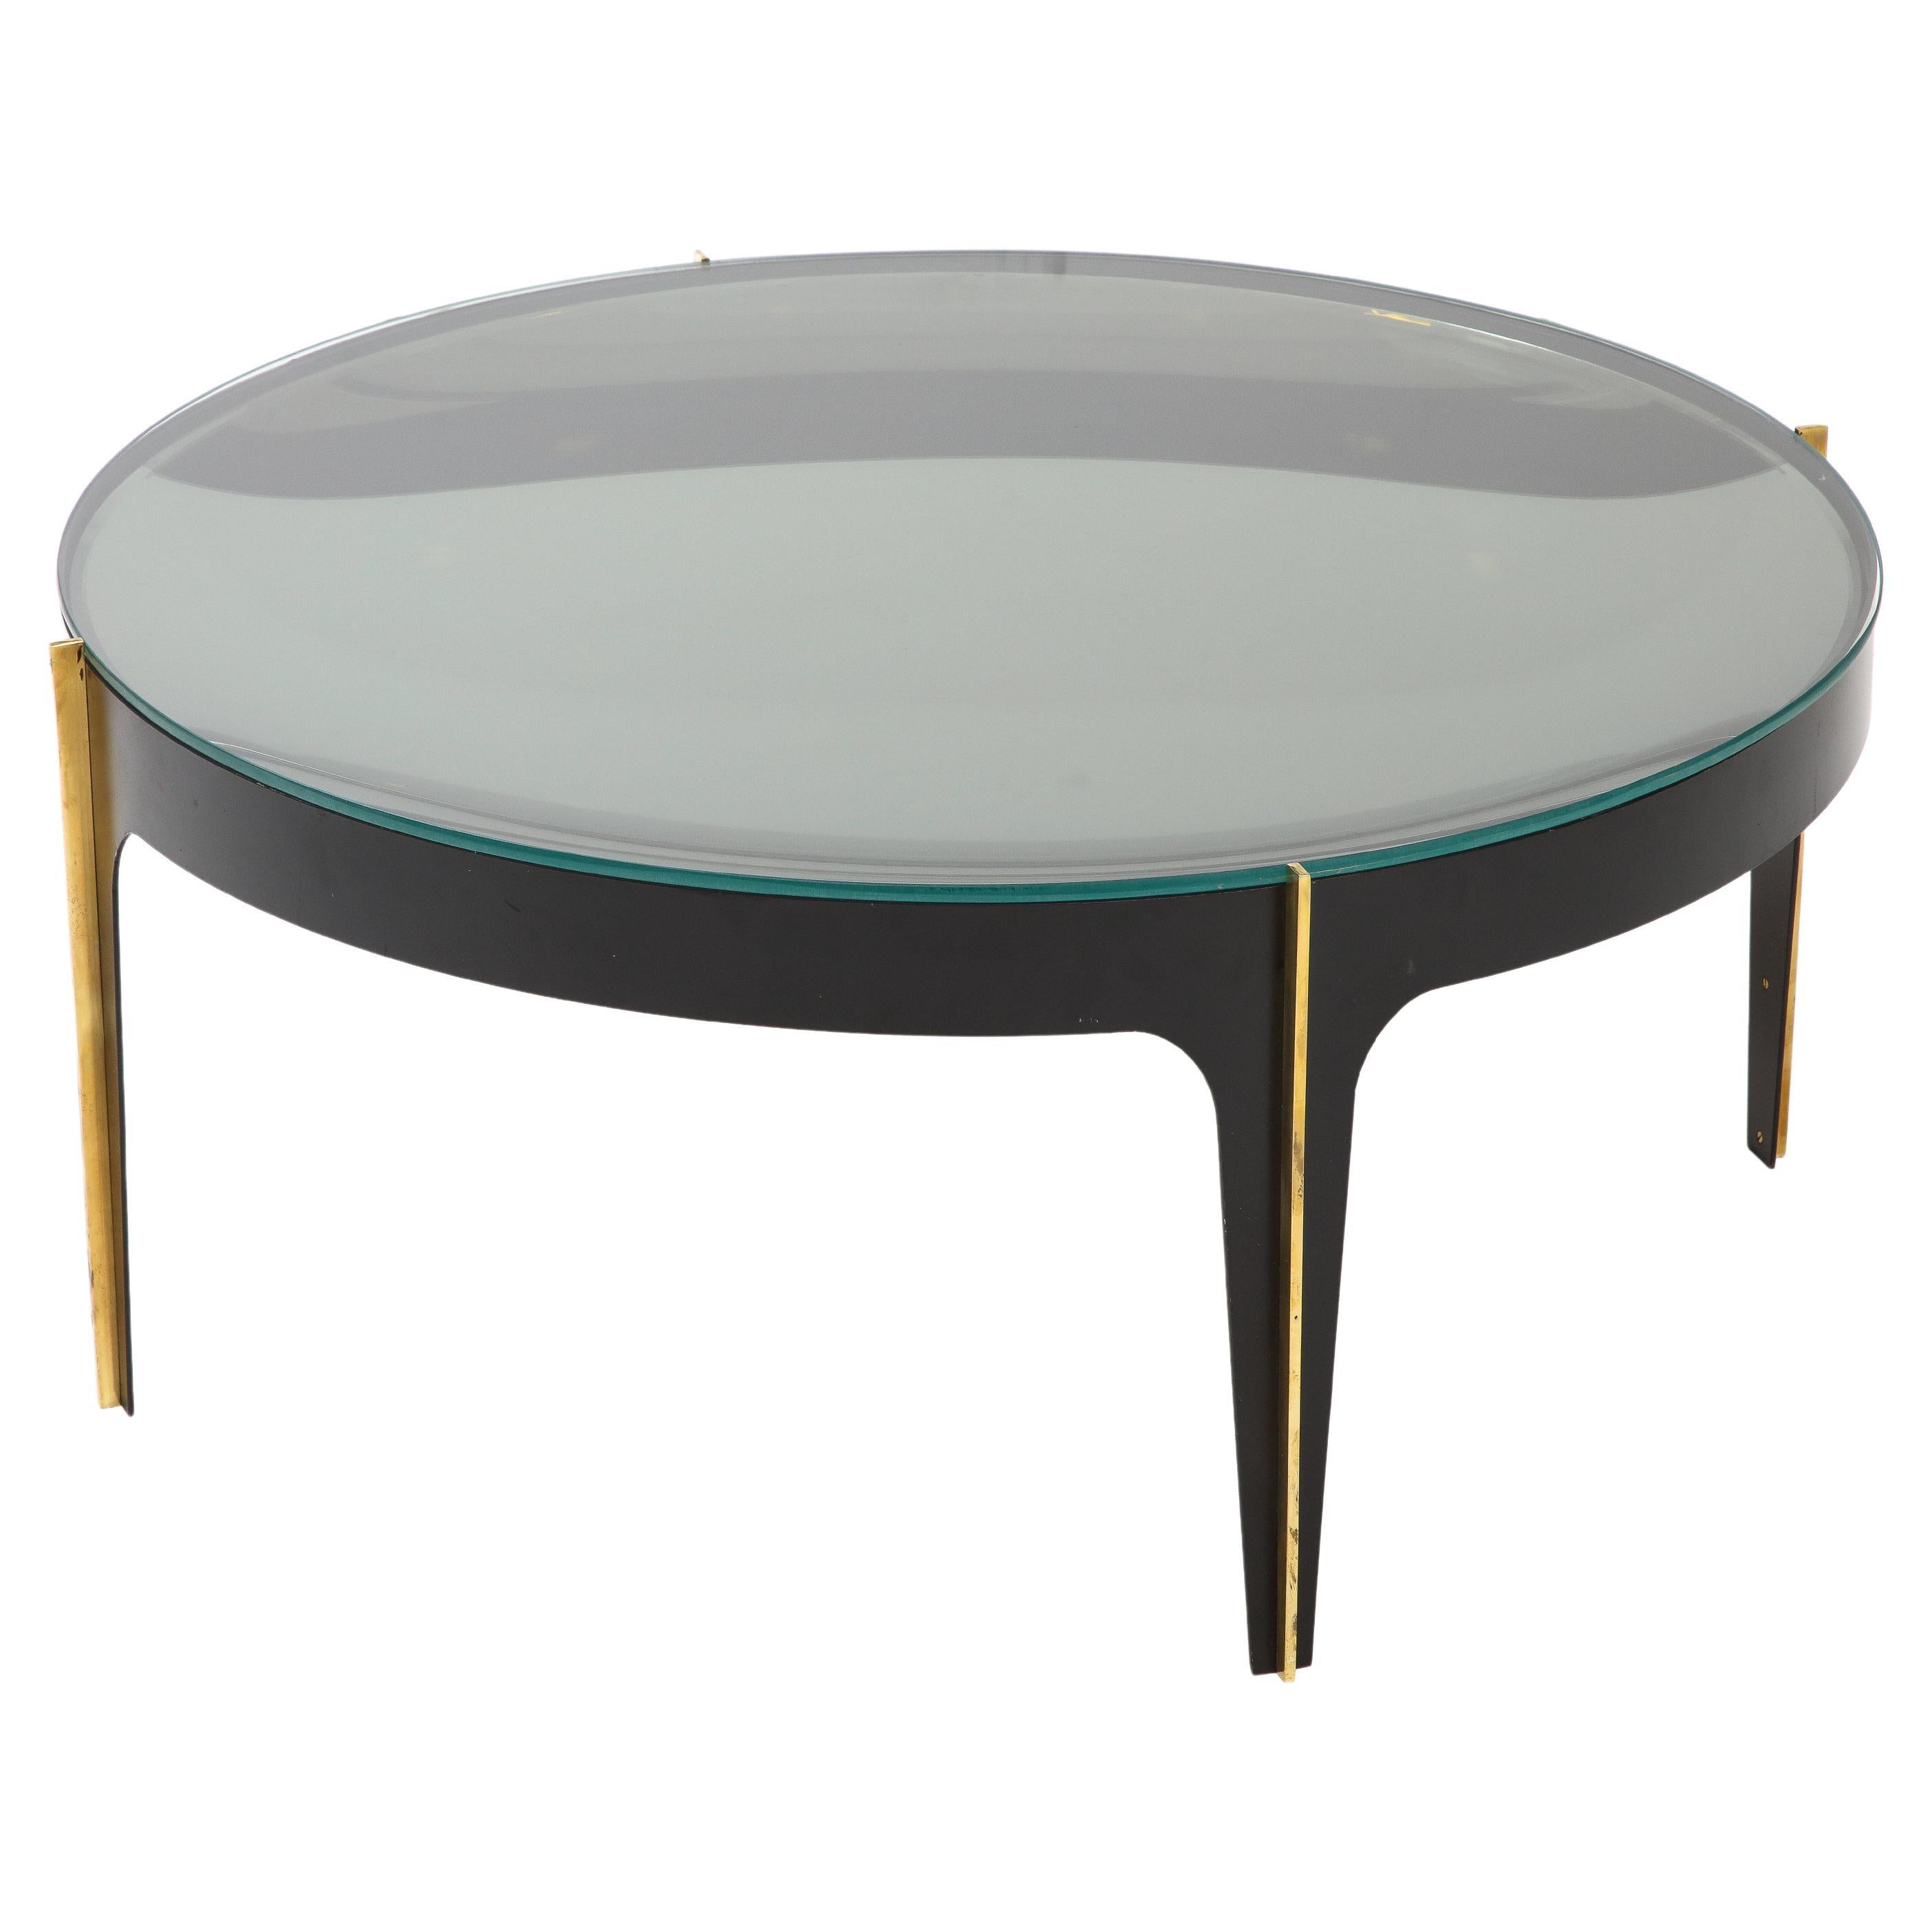 Round Cocktail Table in Black Enameled Metal, Brass and Green Grey Optical Glass